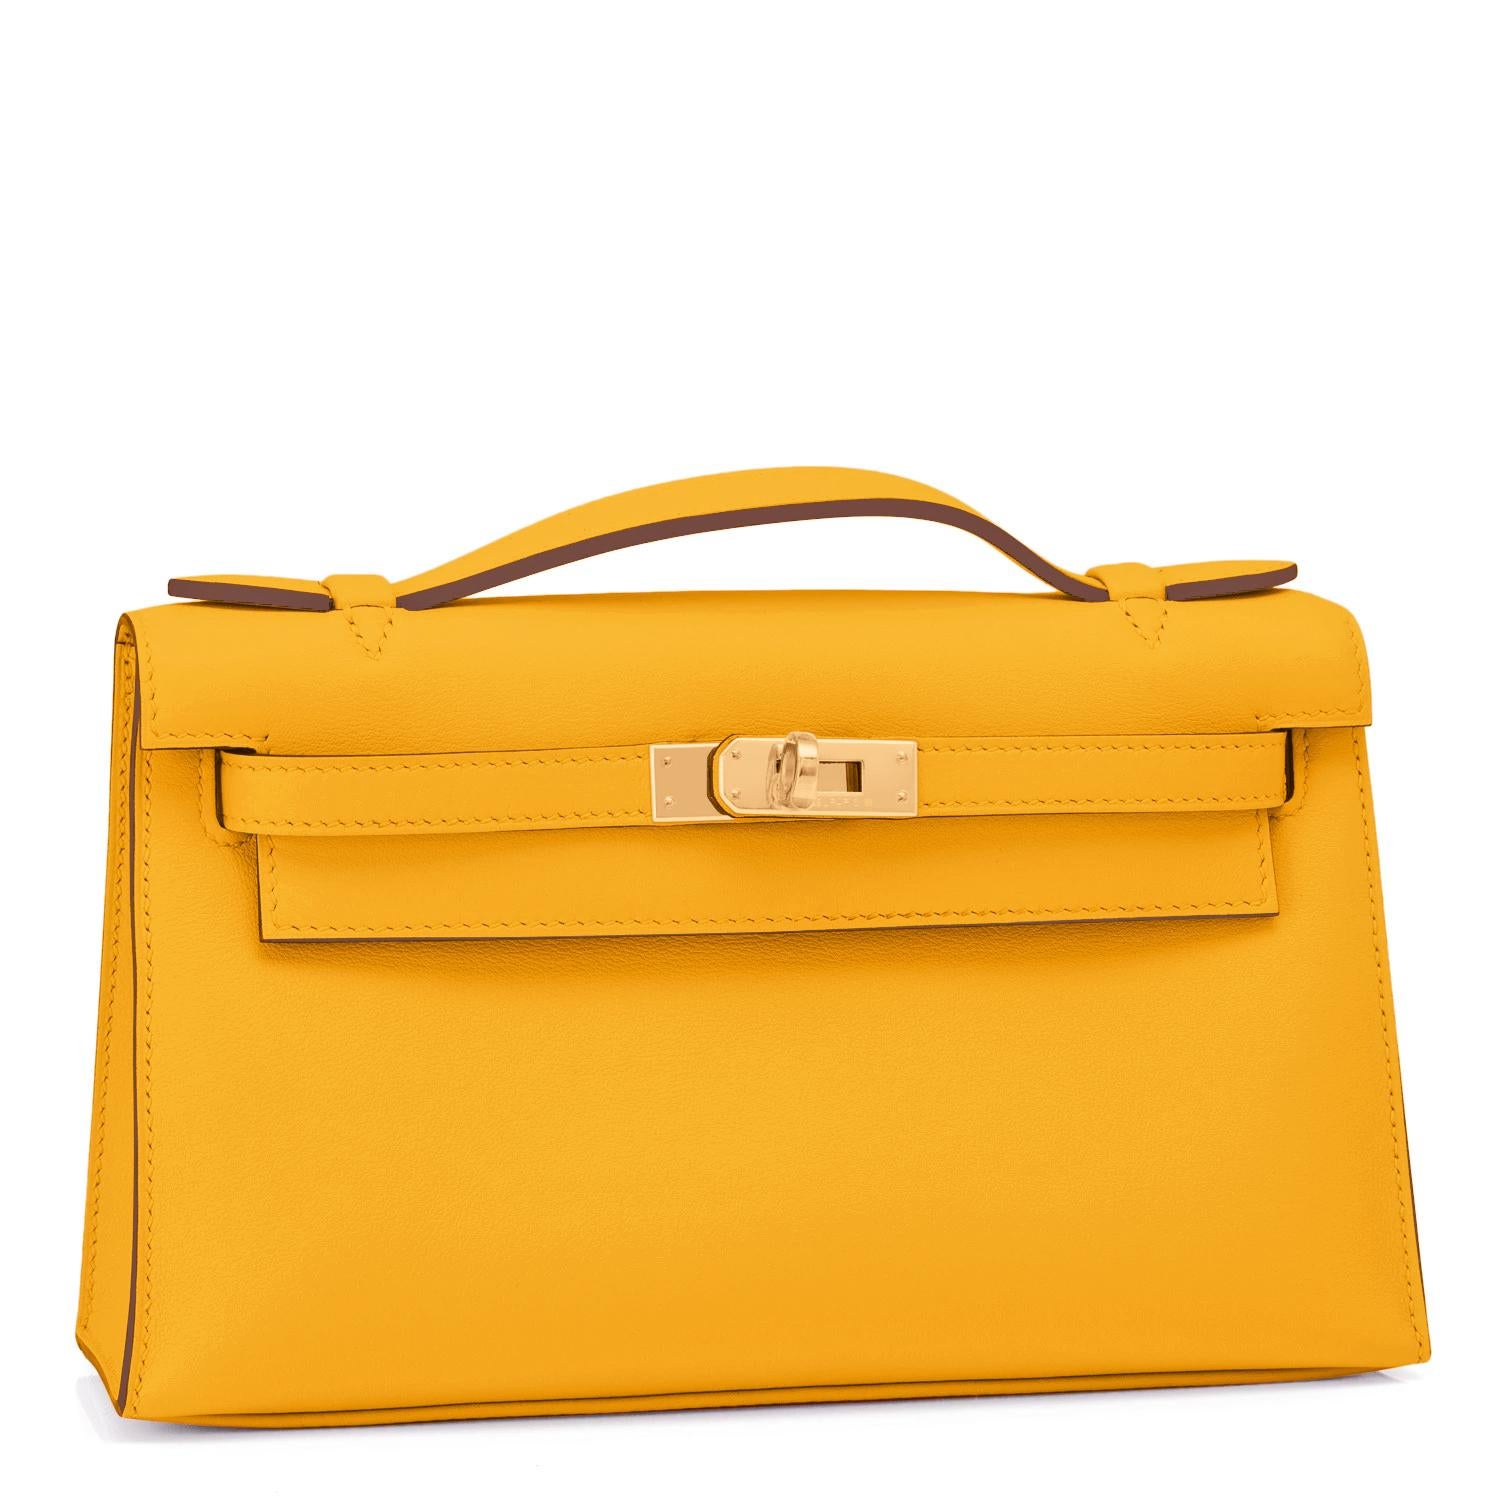 Hermes Kelly Pochette Jaune Amber Gold Hardware Clutch Cut Bag Y Stamp, 2020
Jaune Amber is a gorgeous rich yellow that is so coveted with gold hardware in this rare Kelly Pochette.
This superb color is perfect for spring summer 2021 in our joyous